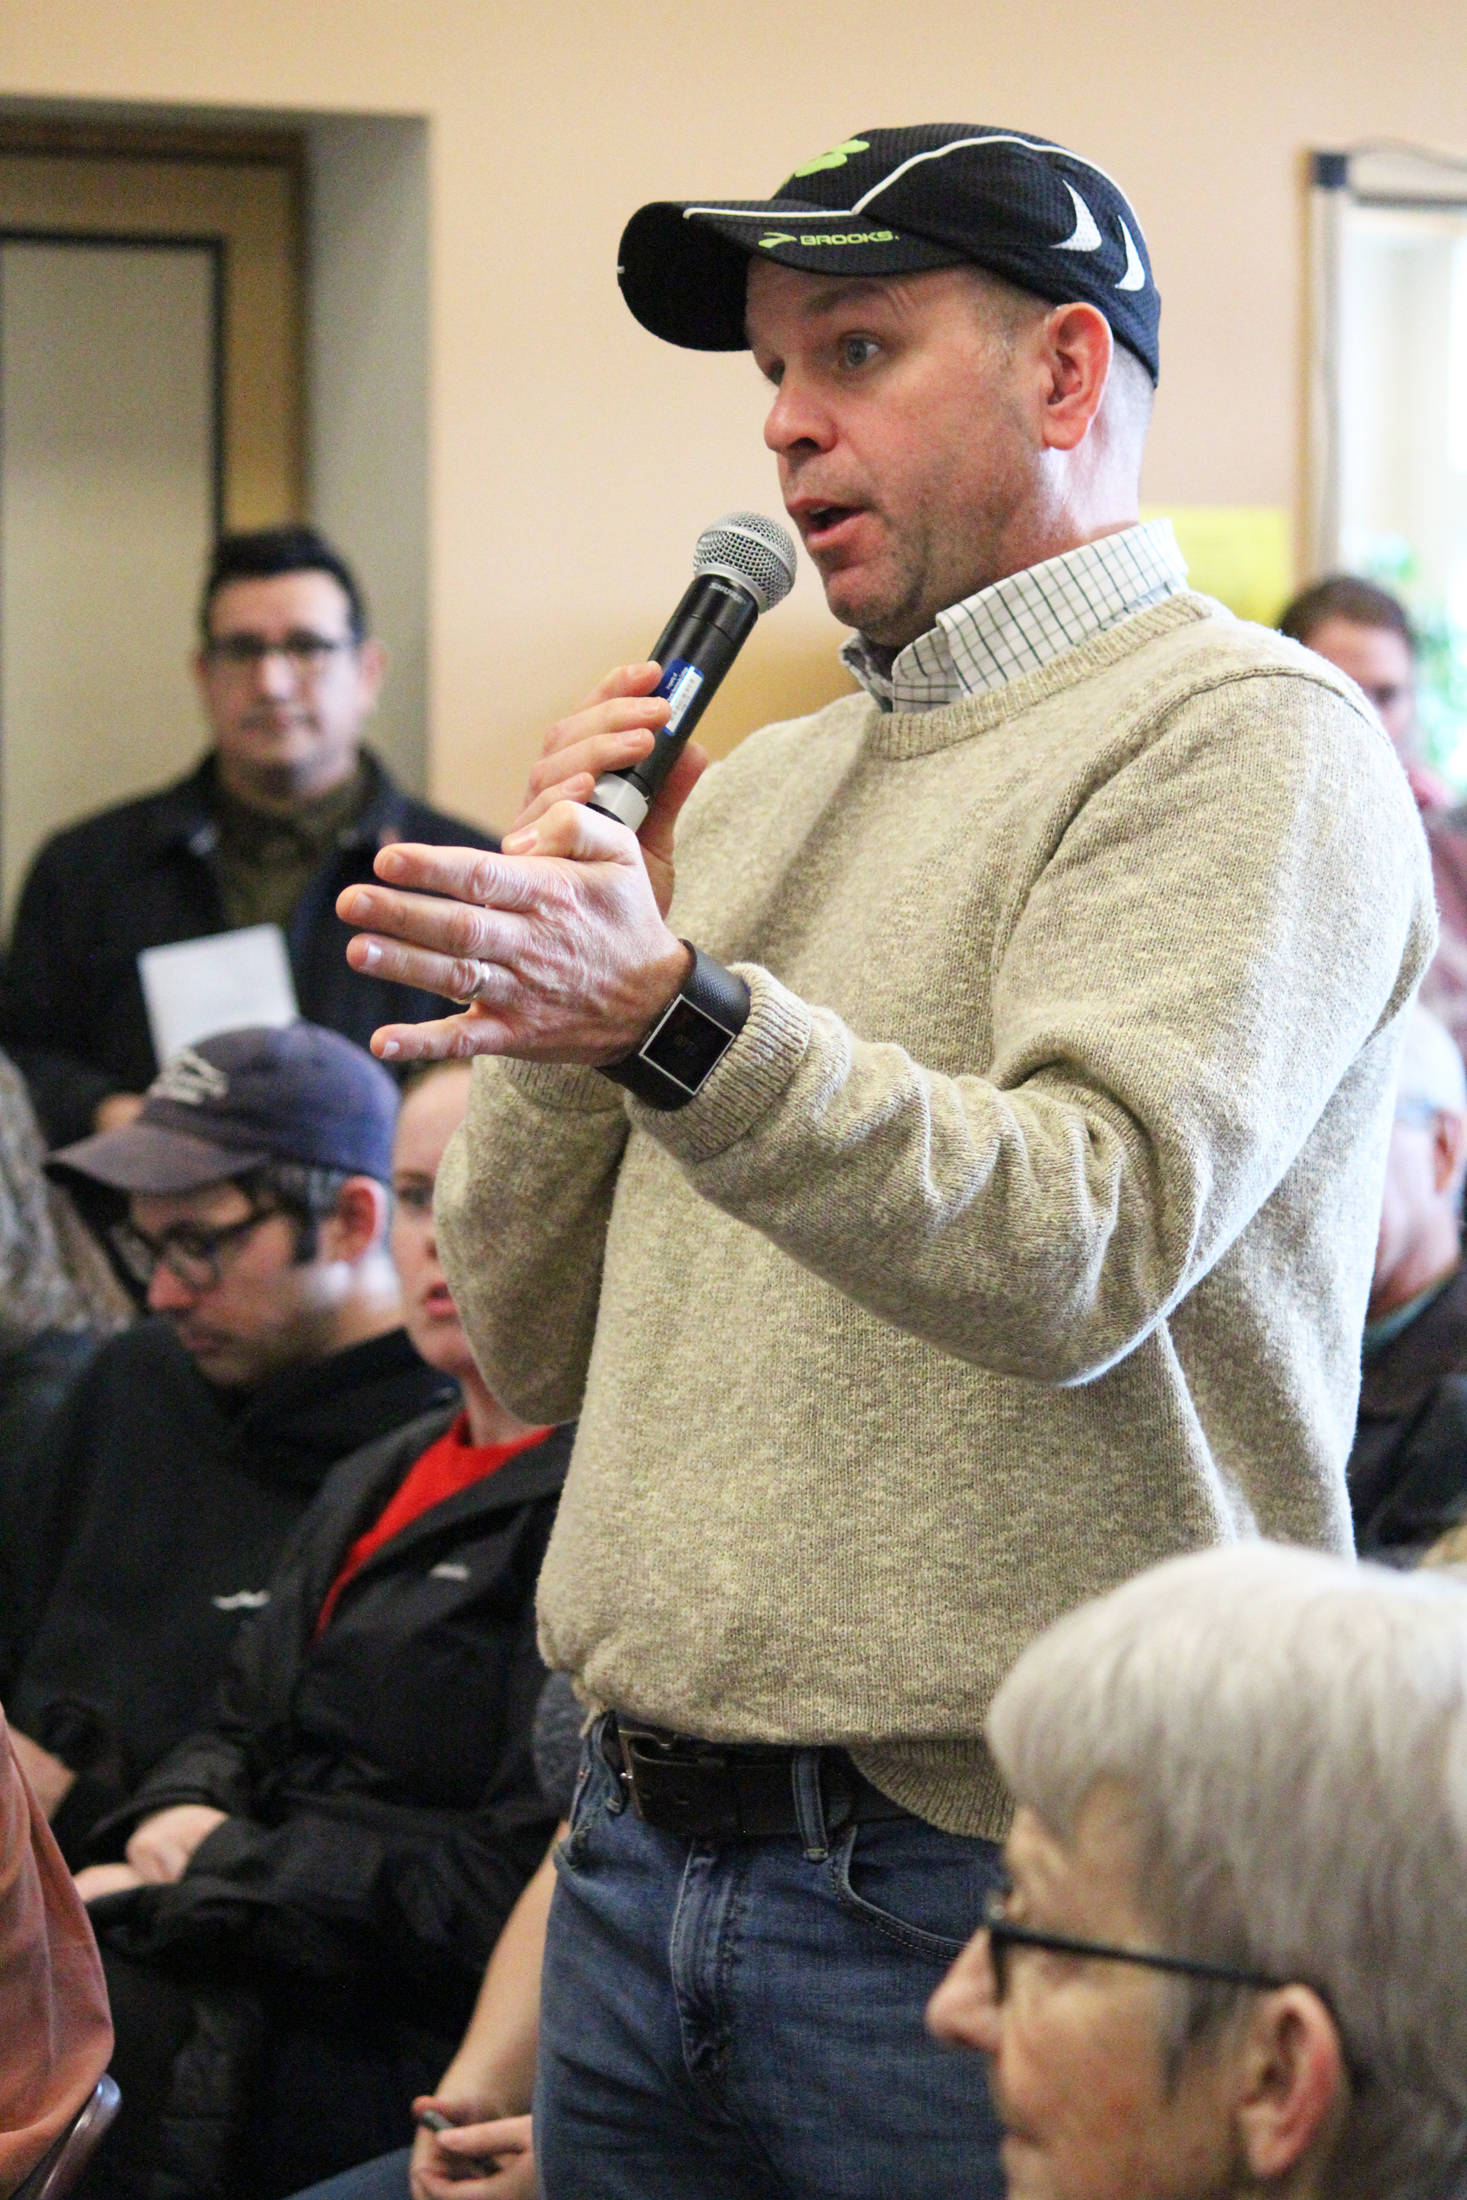 Mike Illg, a member of the Kenai Peninsula Borough School District Board of Education, speaks to Rep. Sarah Vance (R-Homer) at a town hall meeting Saturday, March 2, 2019 at Kachemak Bay Campus in Homer, Alaska. Proposed cuts to public education funding were a major point of contention at the town hall. (Photo by Megan Pacer/Homer News)